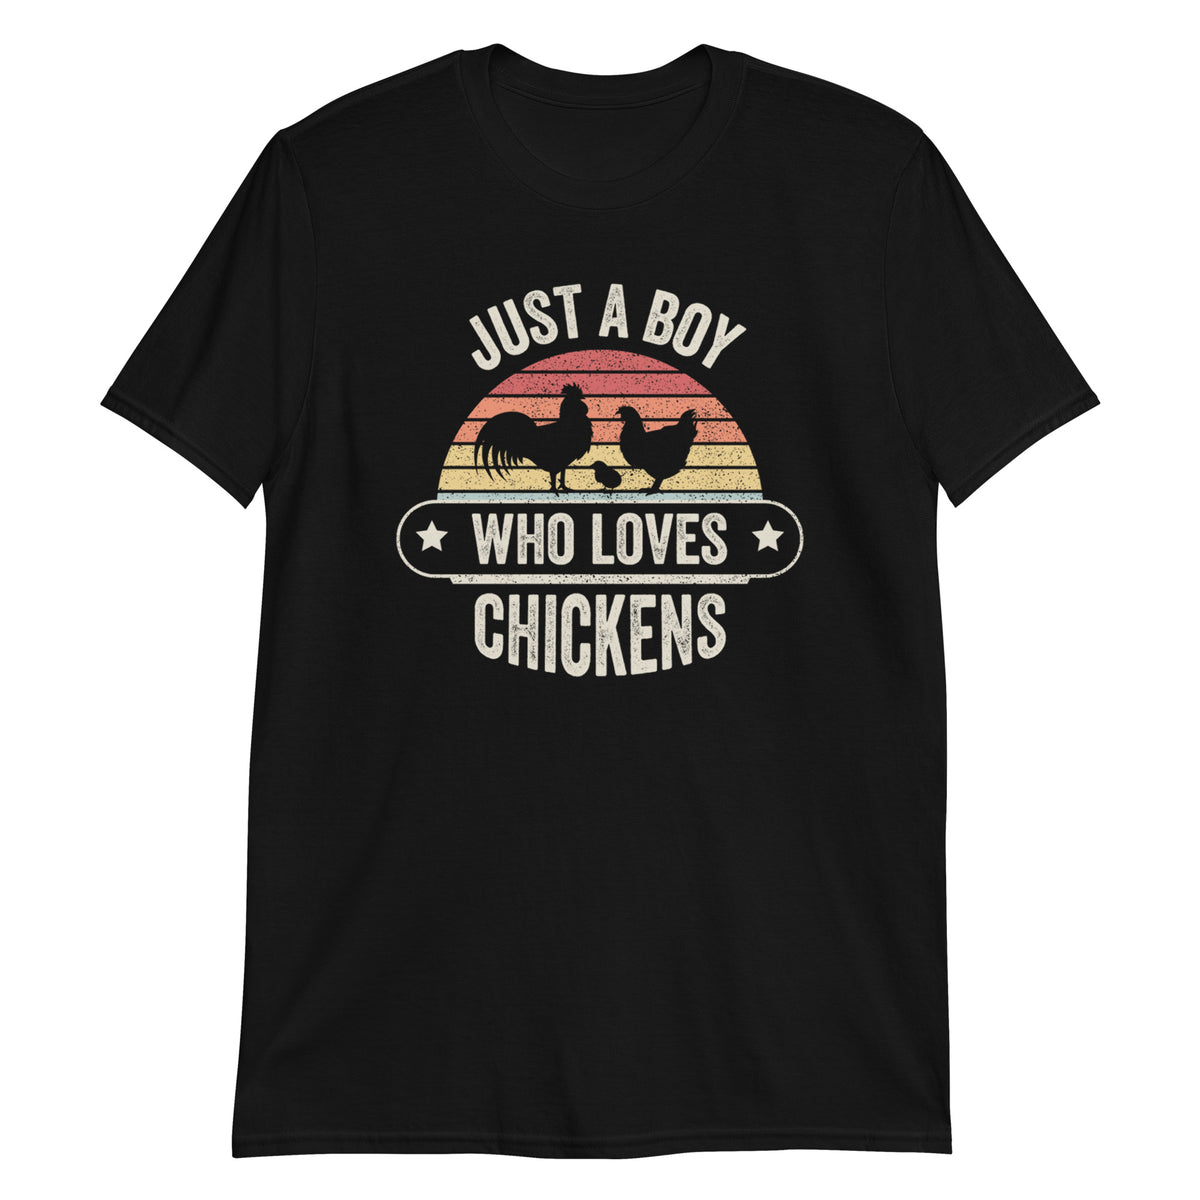 Just A Boy Who Loves Chickens T-Shirt